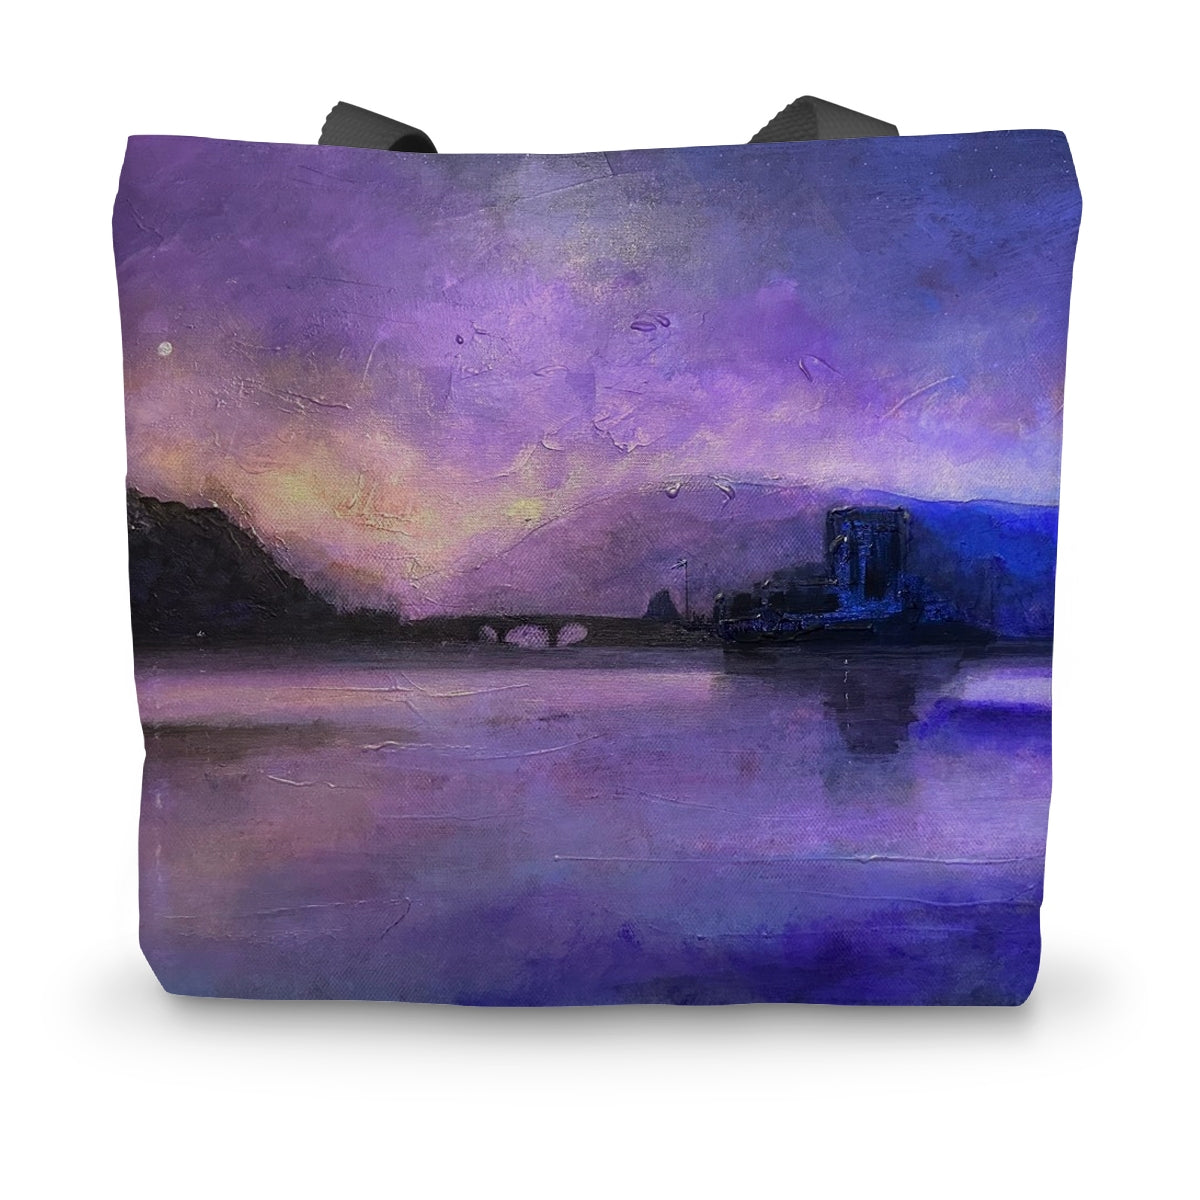 Eilean Donan Castle Moonset Art Gifts Canvas Tote Bag-Bags-Historic & Iconic Scotland Art Gallery-14"x18.5"-Paintings, Prints, Homeware, Art Gifts From Scotland By Scottish Artist Kevin Hunter